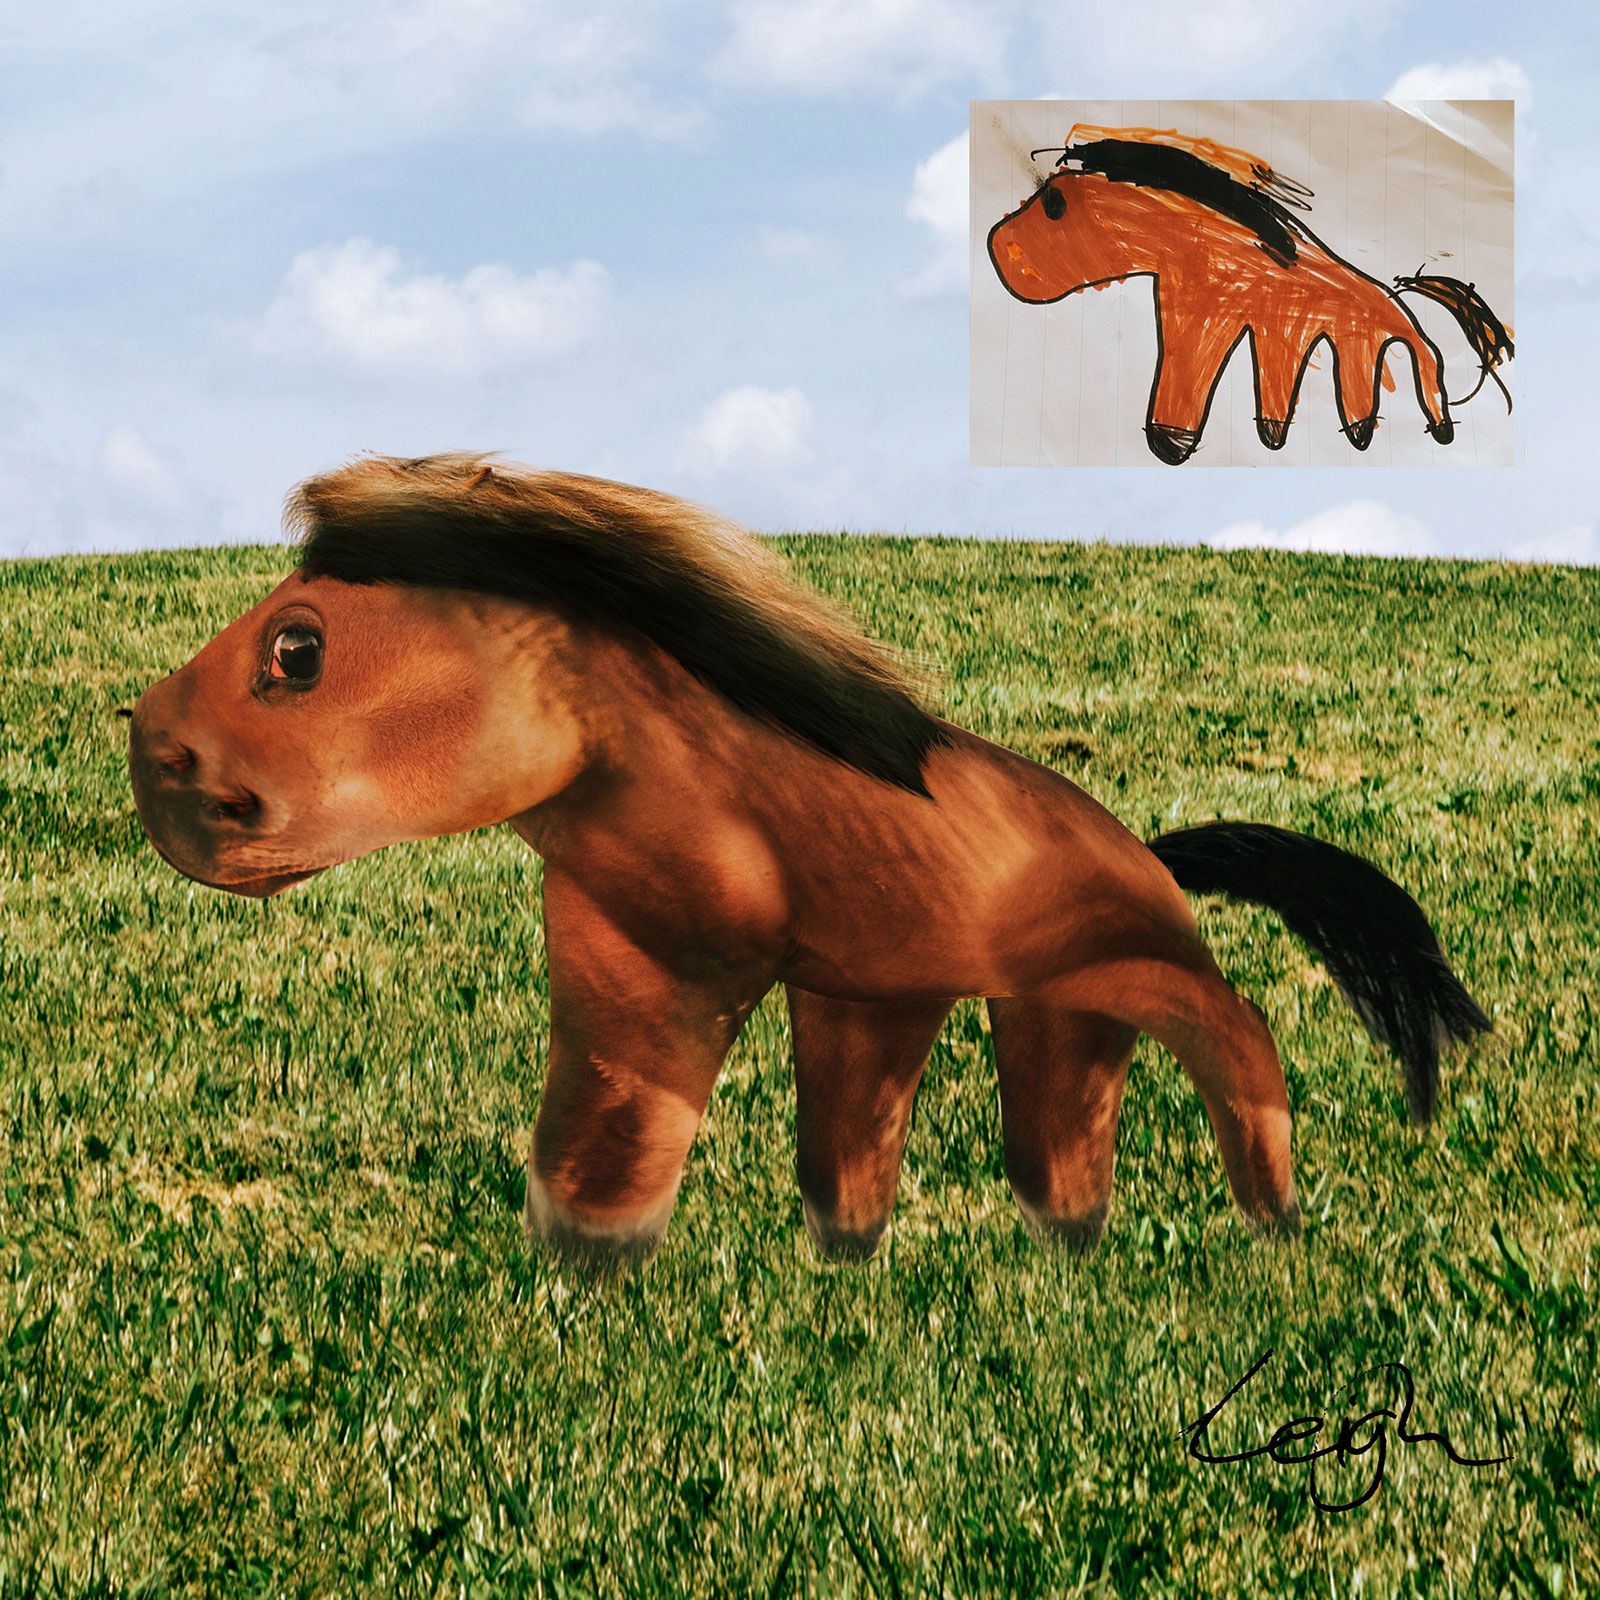 Photoshopped My daughter's Horse